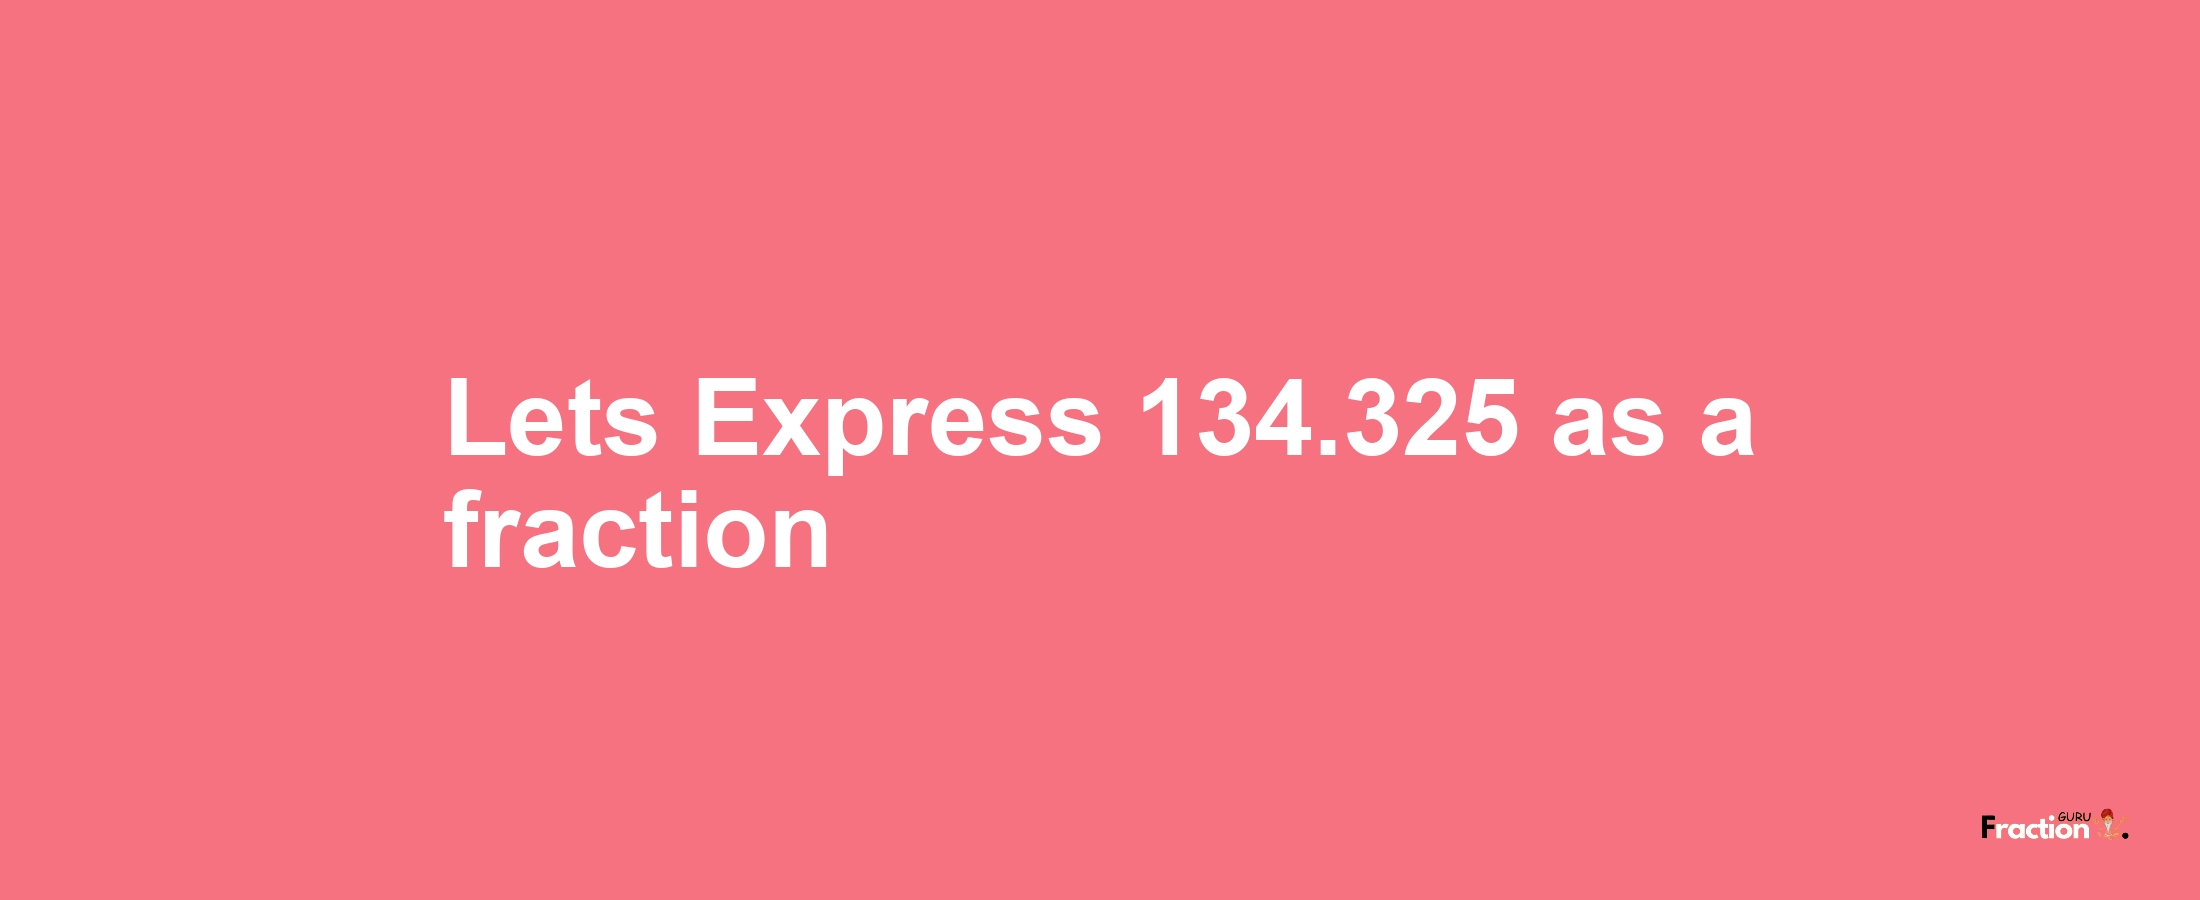 Lets Express 134.325 as afraction